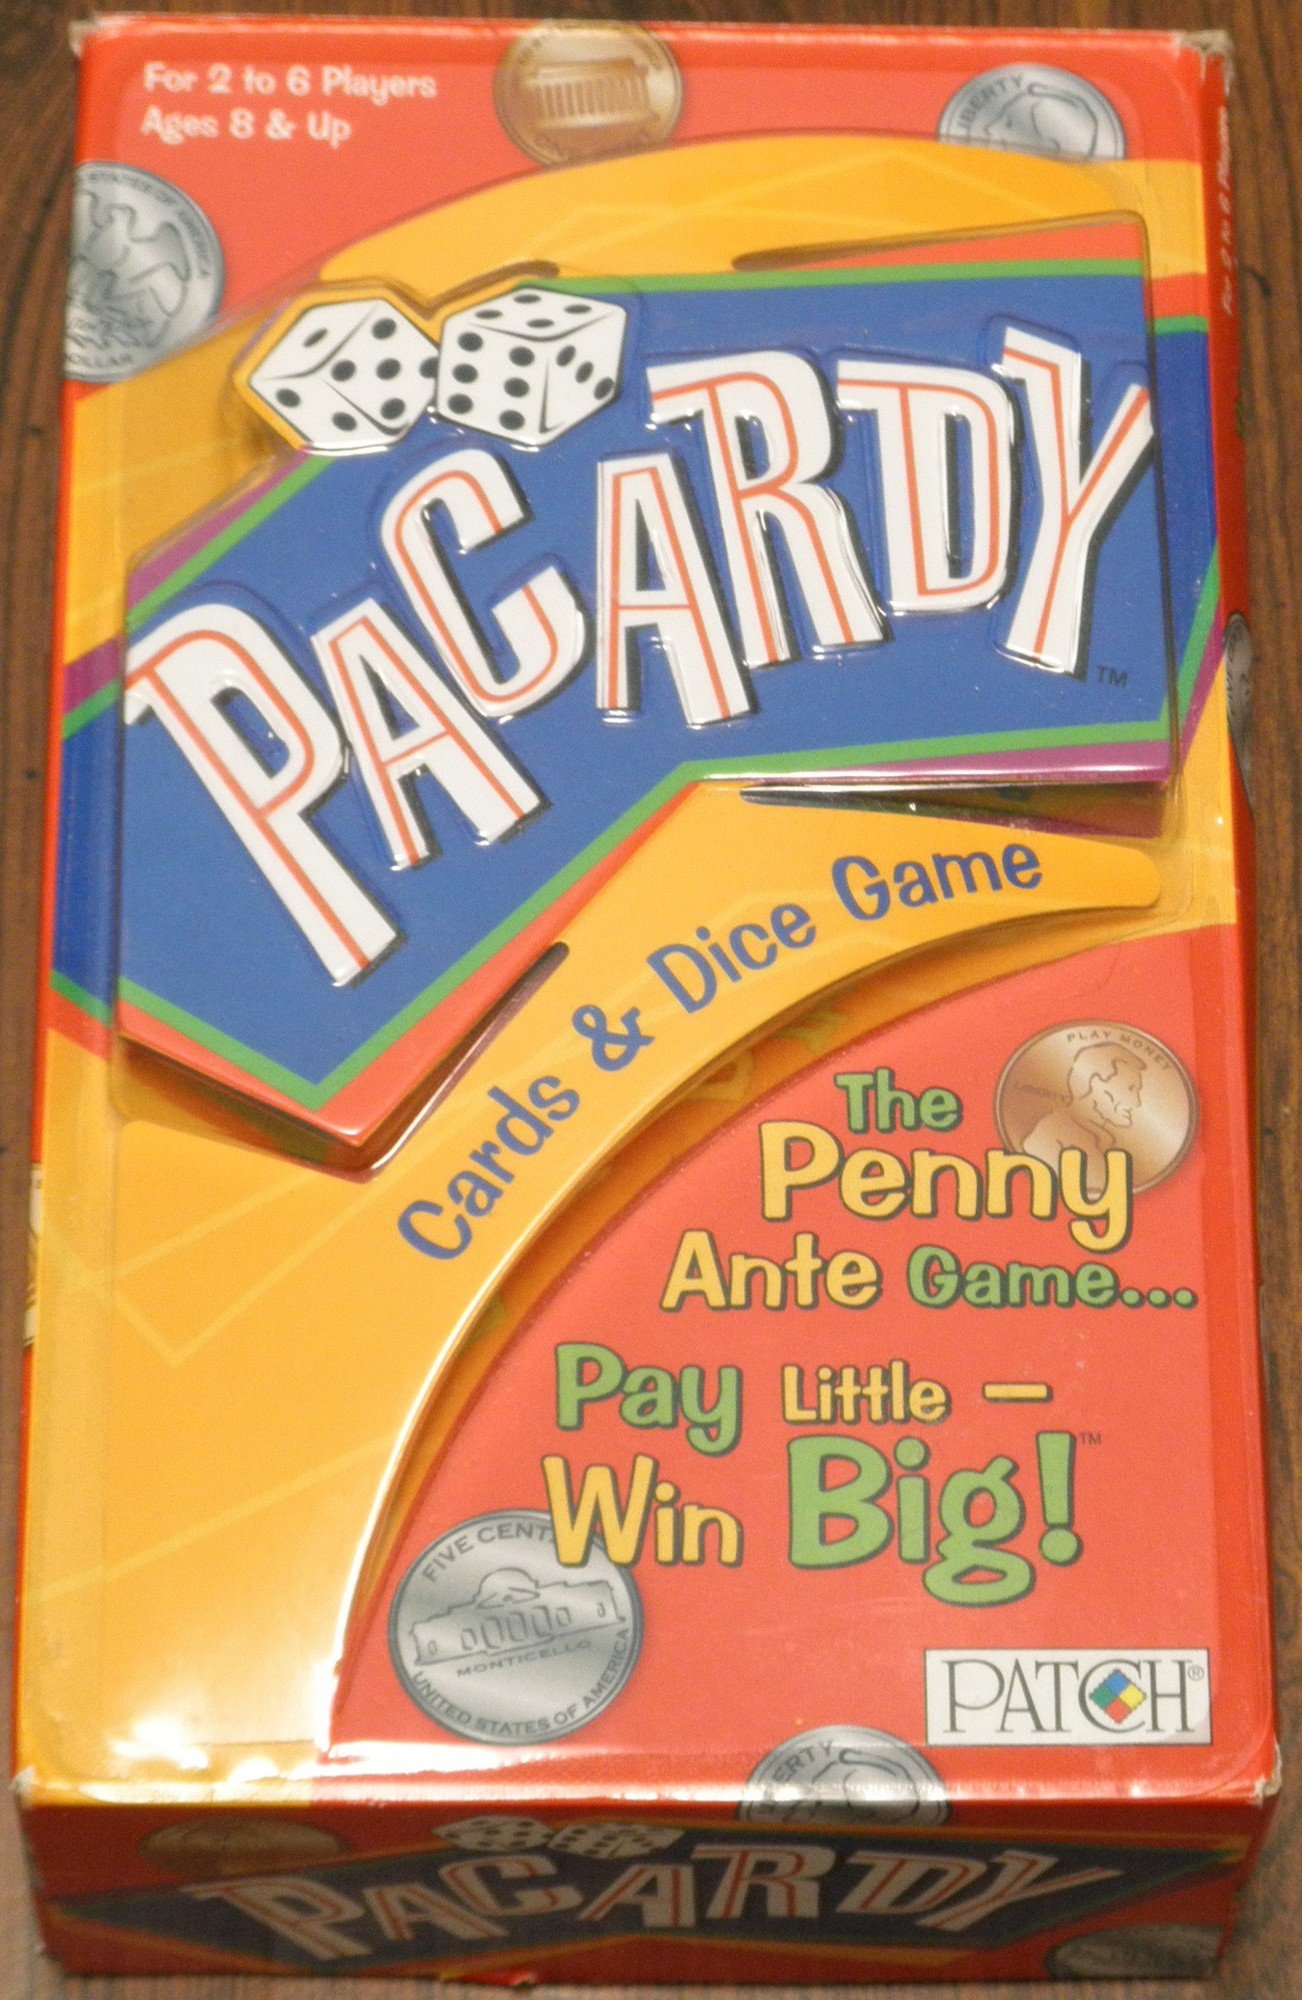 Pacardy Dice Game Review